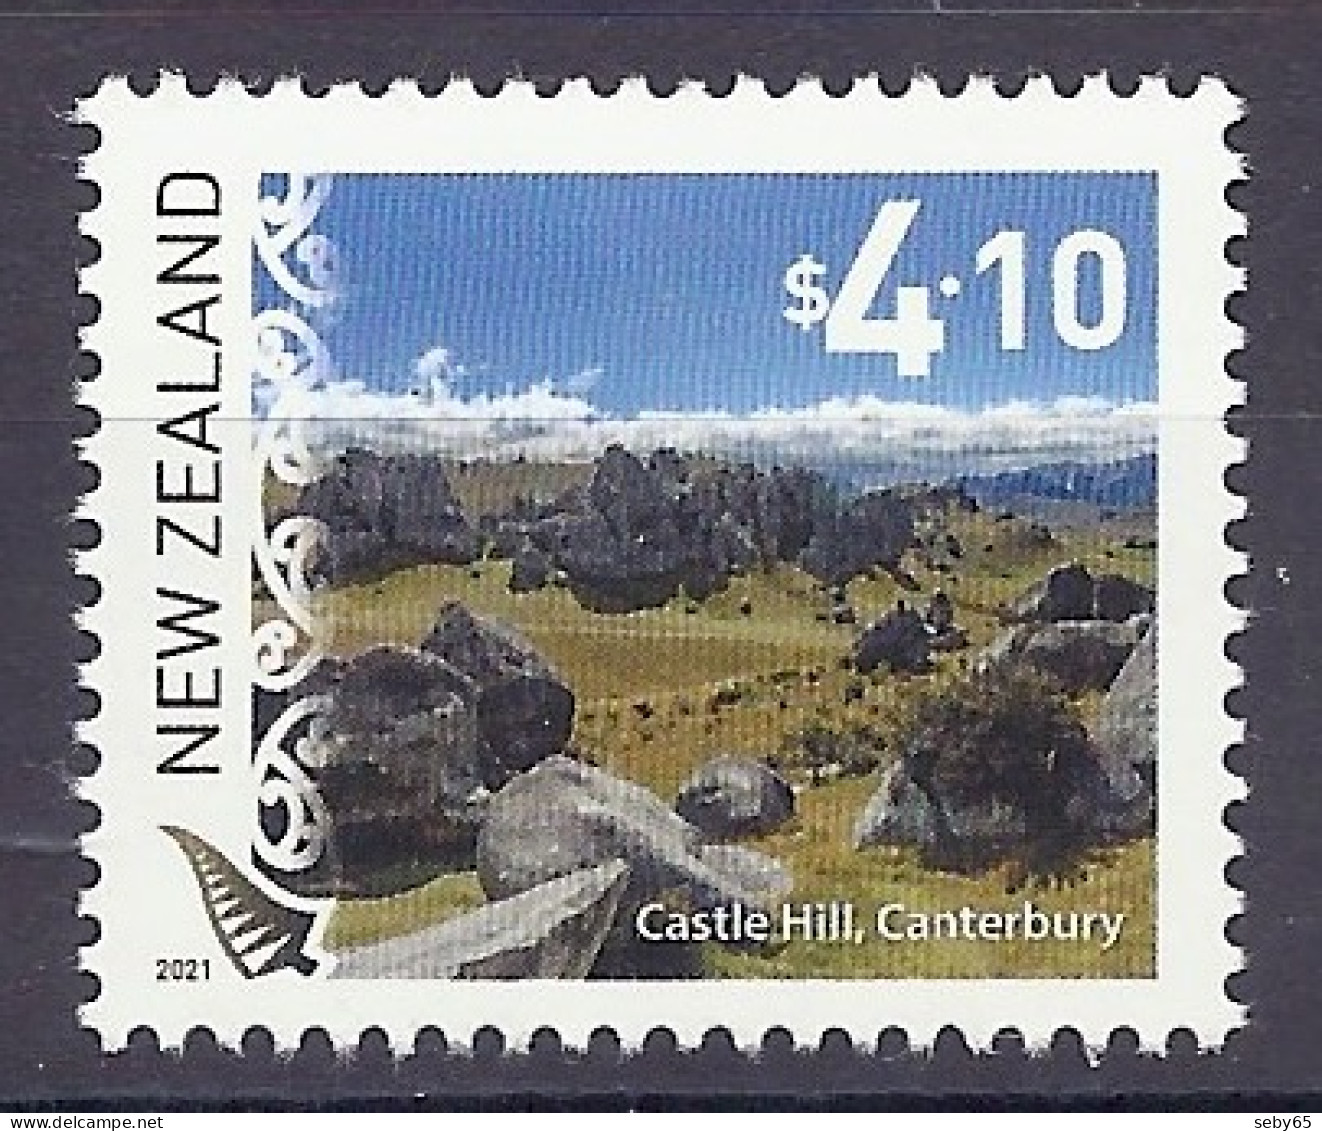 New Zealand 2021 - Definitives, Castle Hill, Canterbury, Scenic Views, Scenery, Mountains, Rocks, Landscapes - MNH - Nuevos